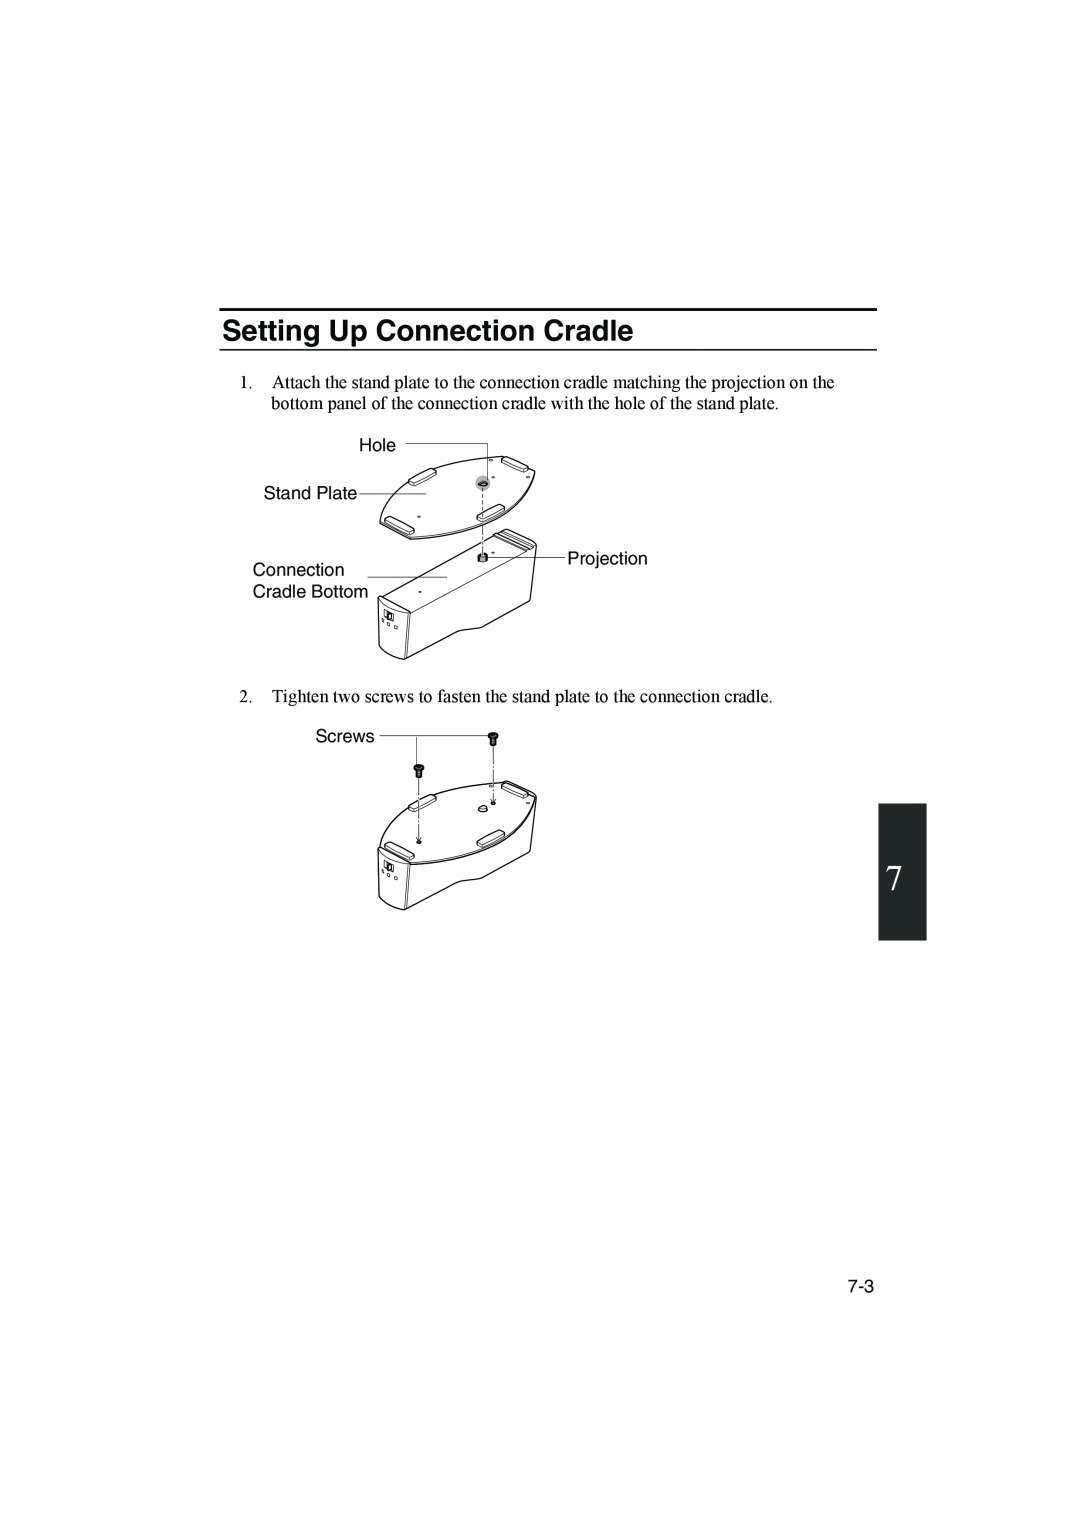 Sharp PC-MM1 manual Setting Up Connection Cradle, Hole, Stand Plate Connection Cradle Bottom, Projection, Screws 